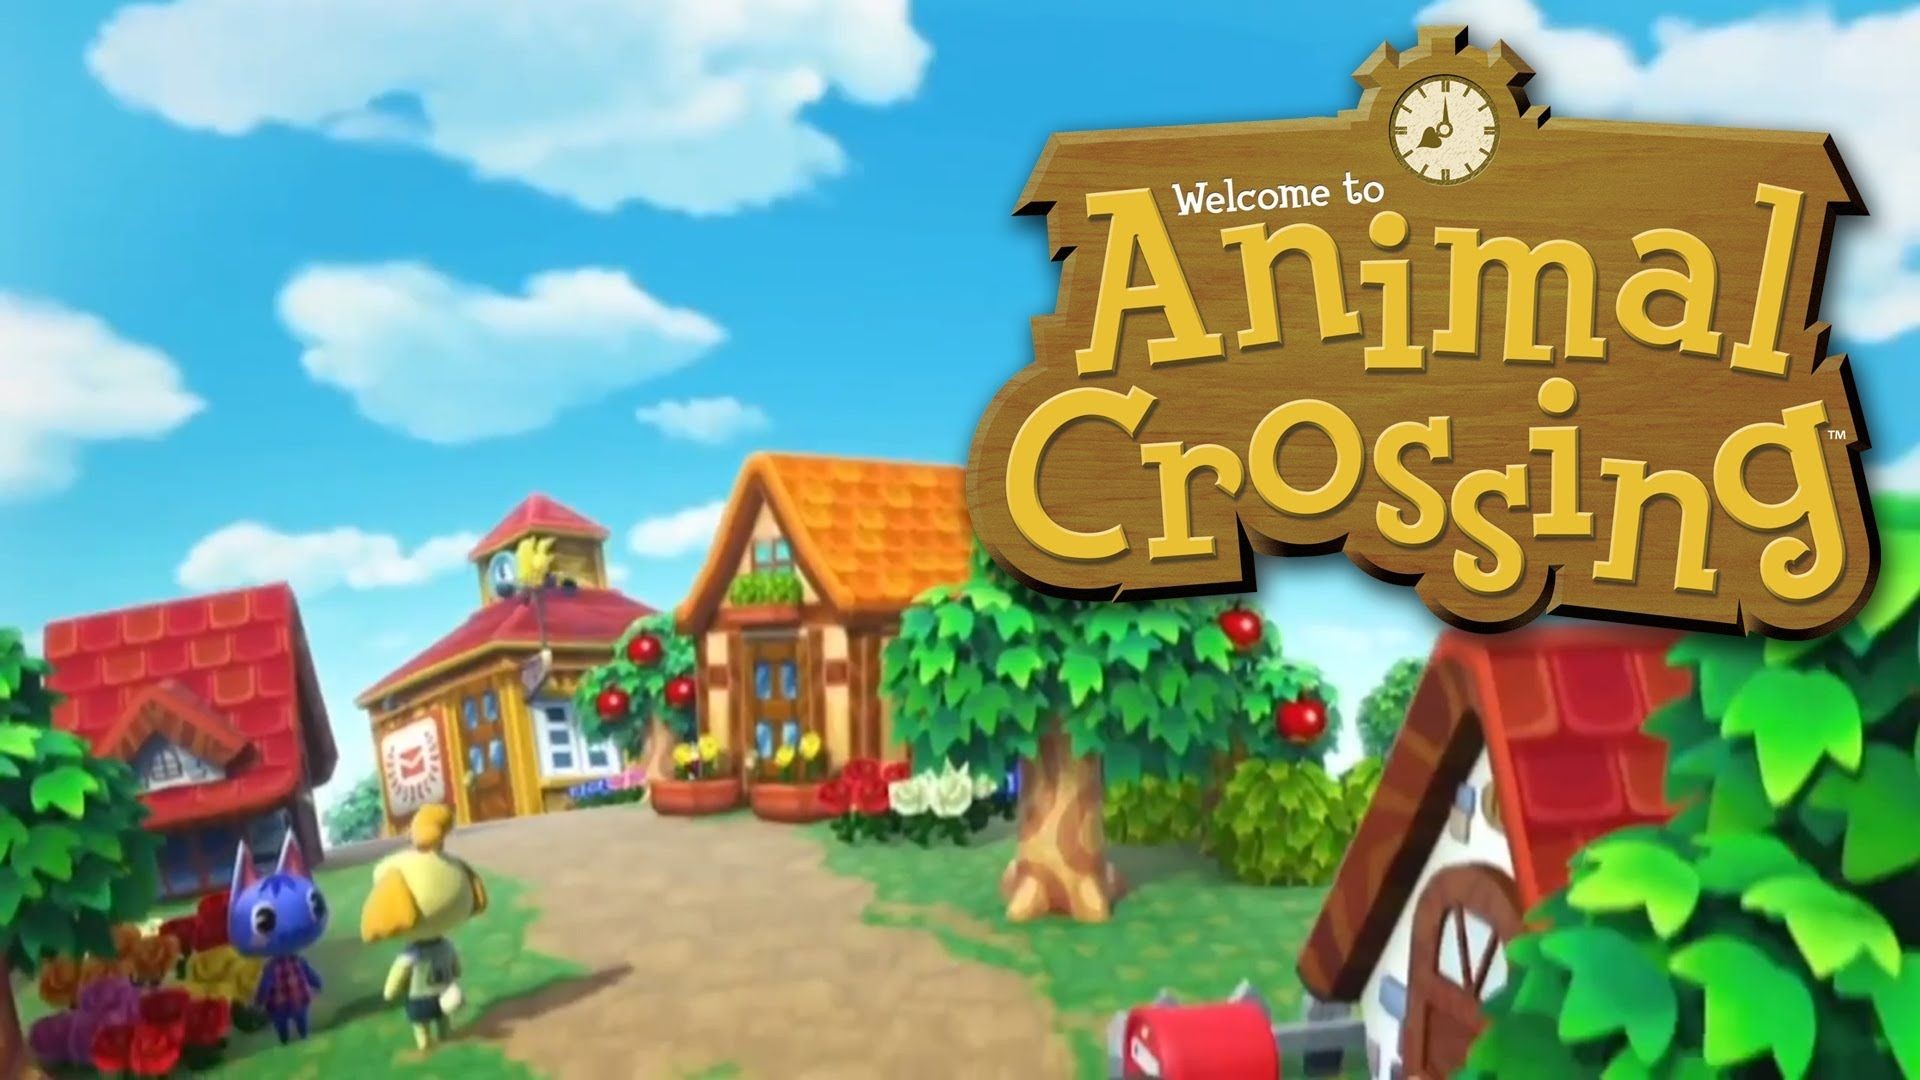 … Wallpapers Hd Animal Crossing Pic Wpe0012464. Download